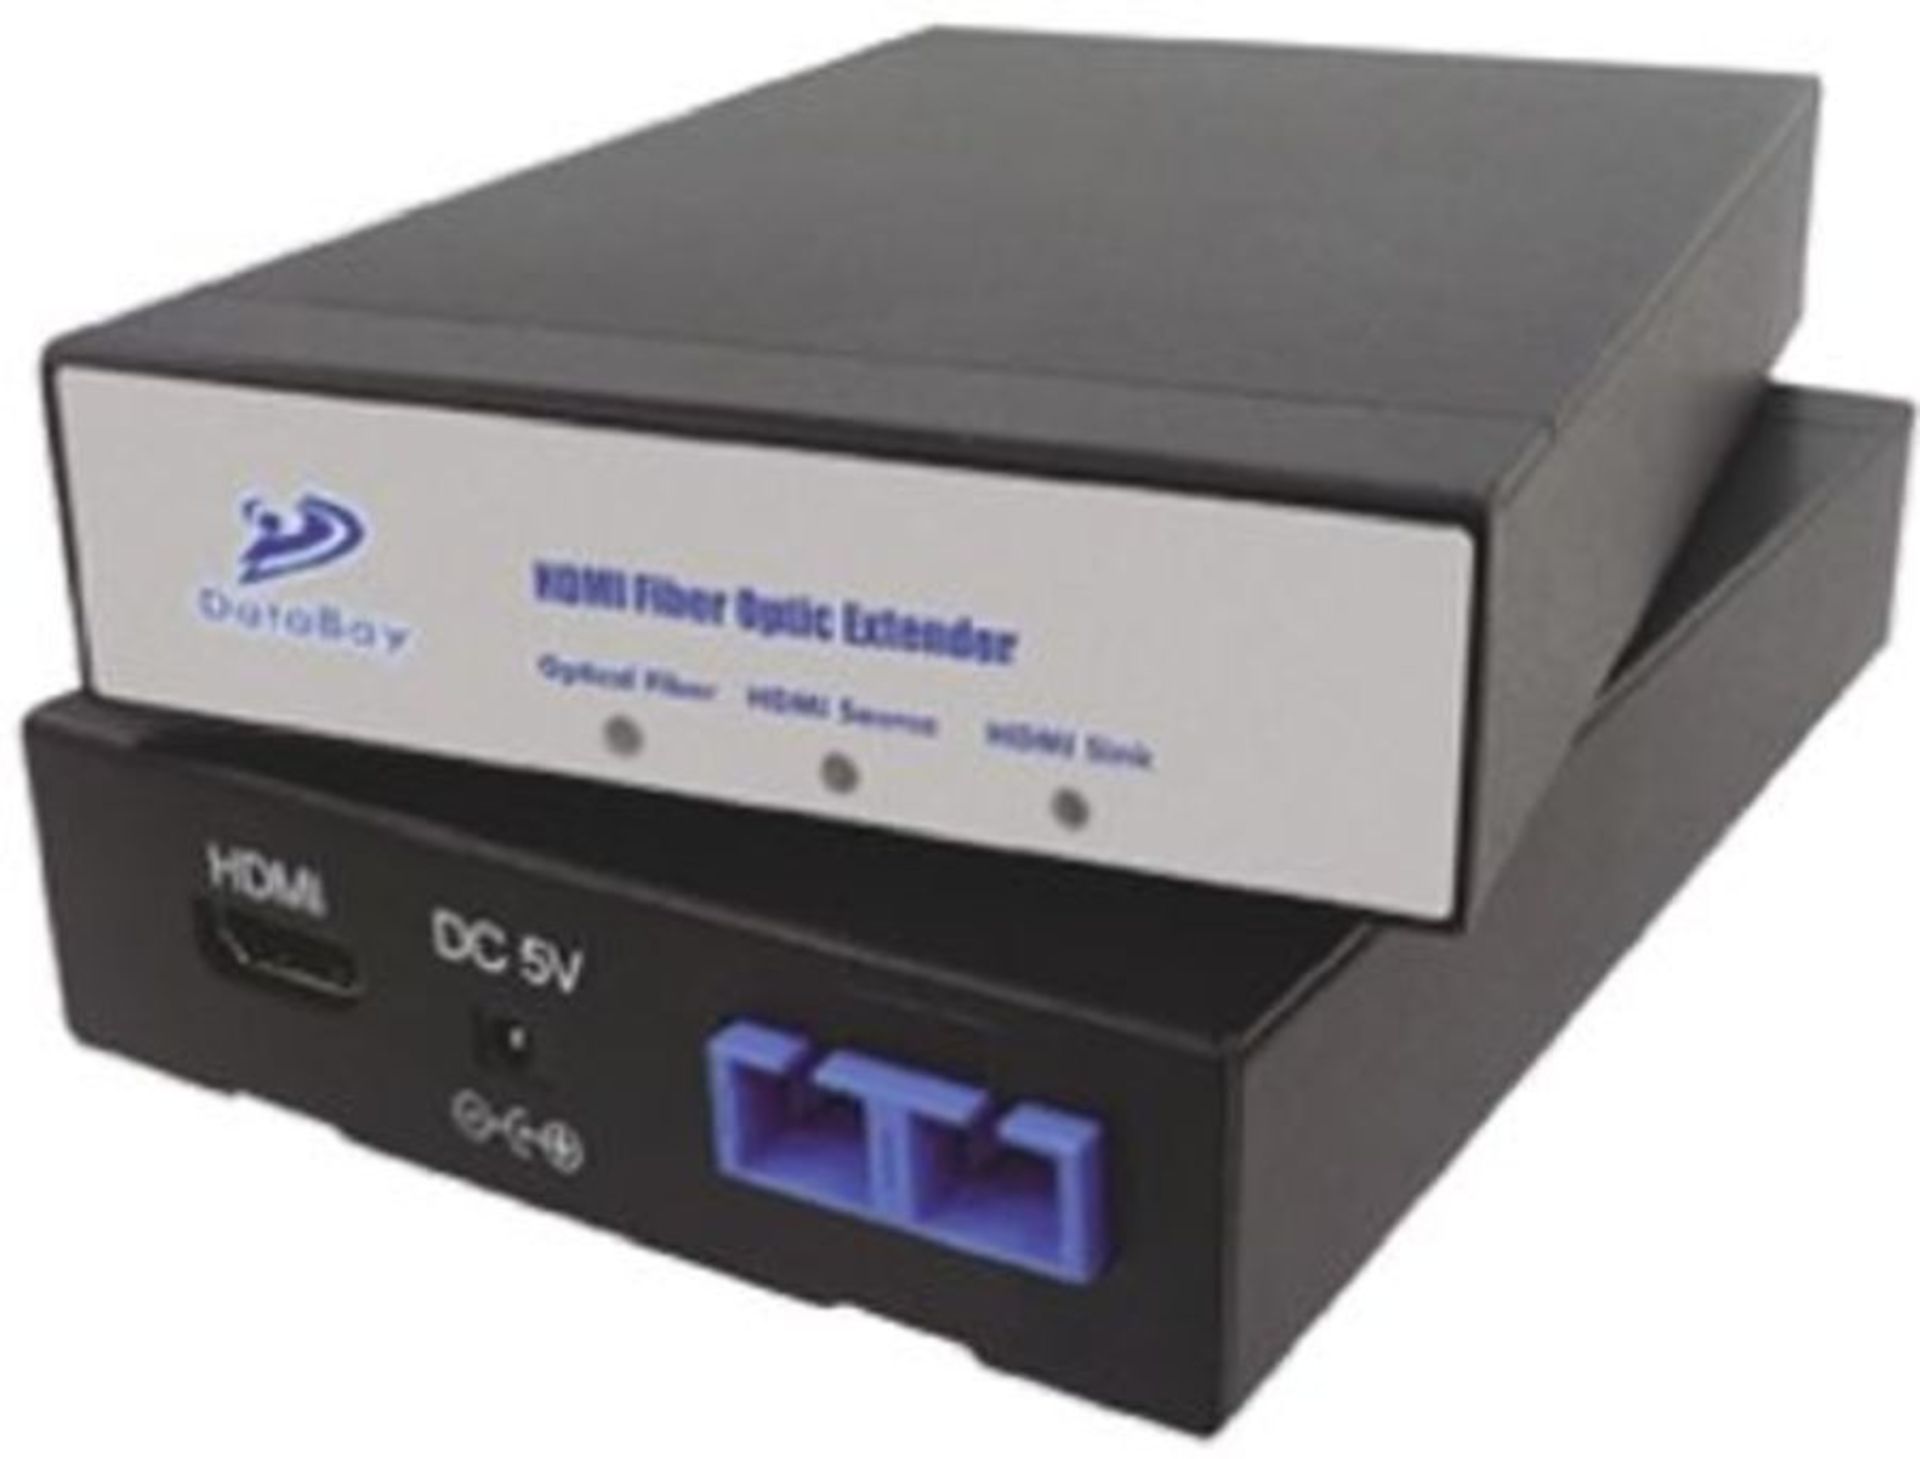 Clever Little Box HDMI + Audio Video Extender - Image 2 of 2